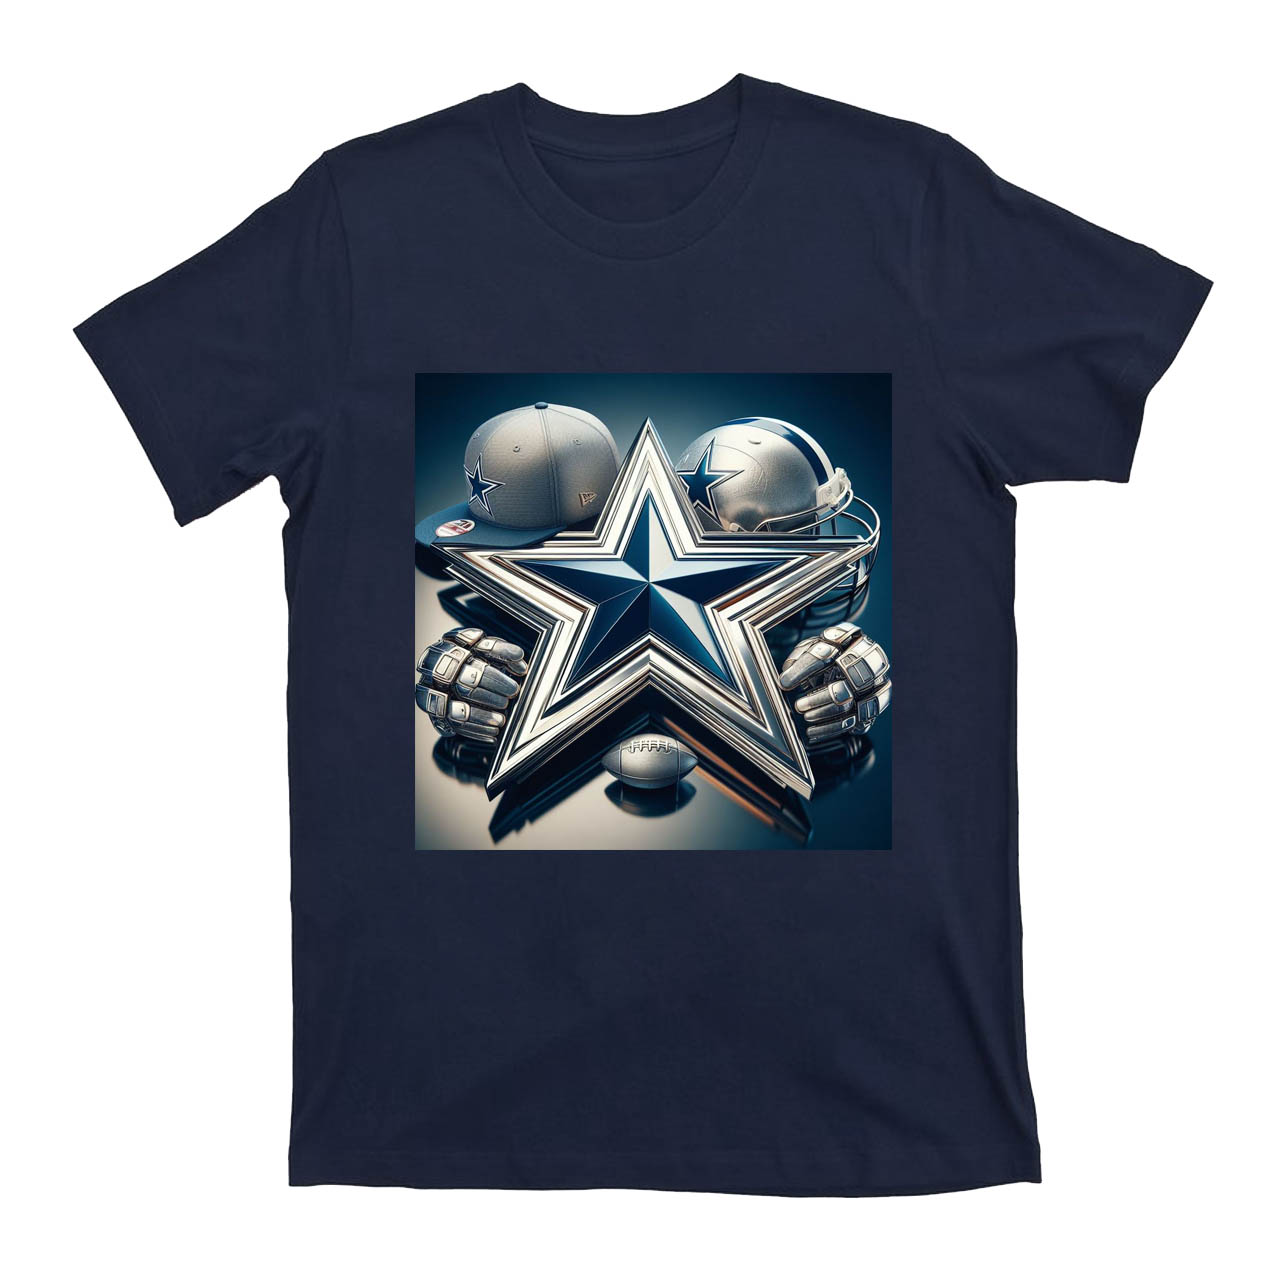 Respect These Star Dallas Cowboys!!! T-shirt